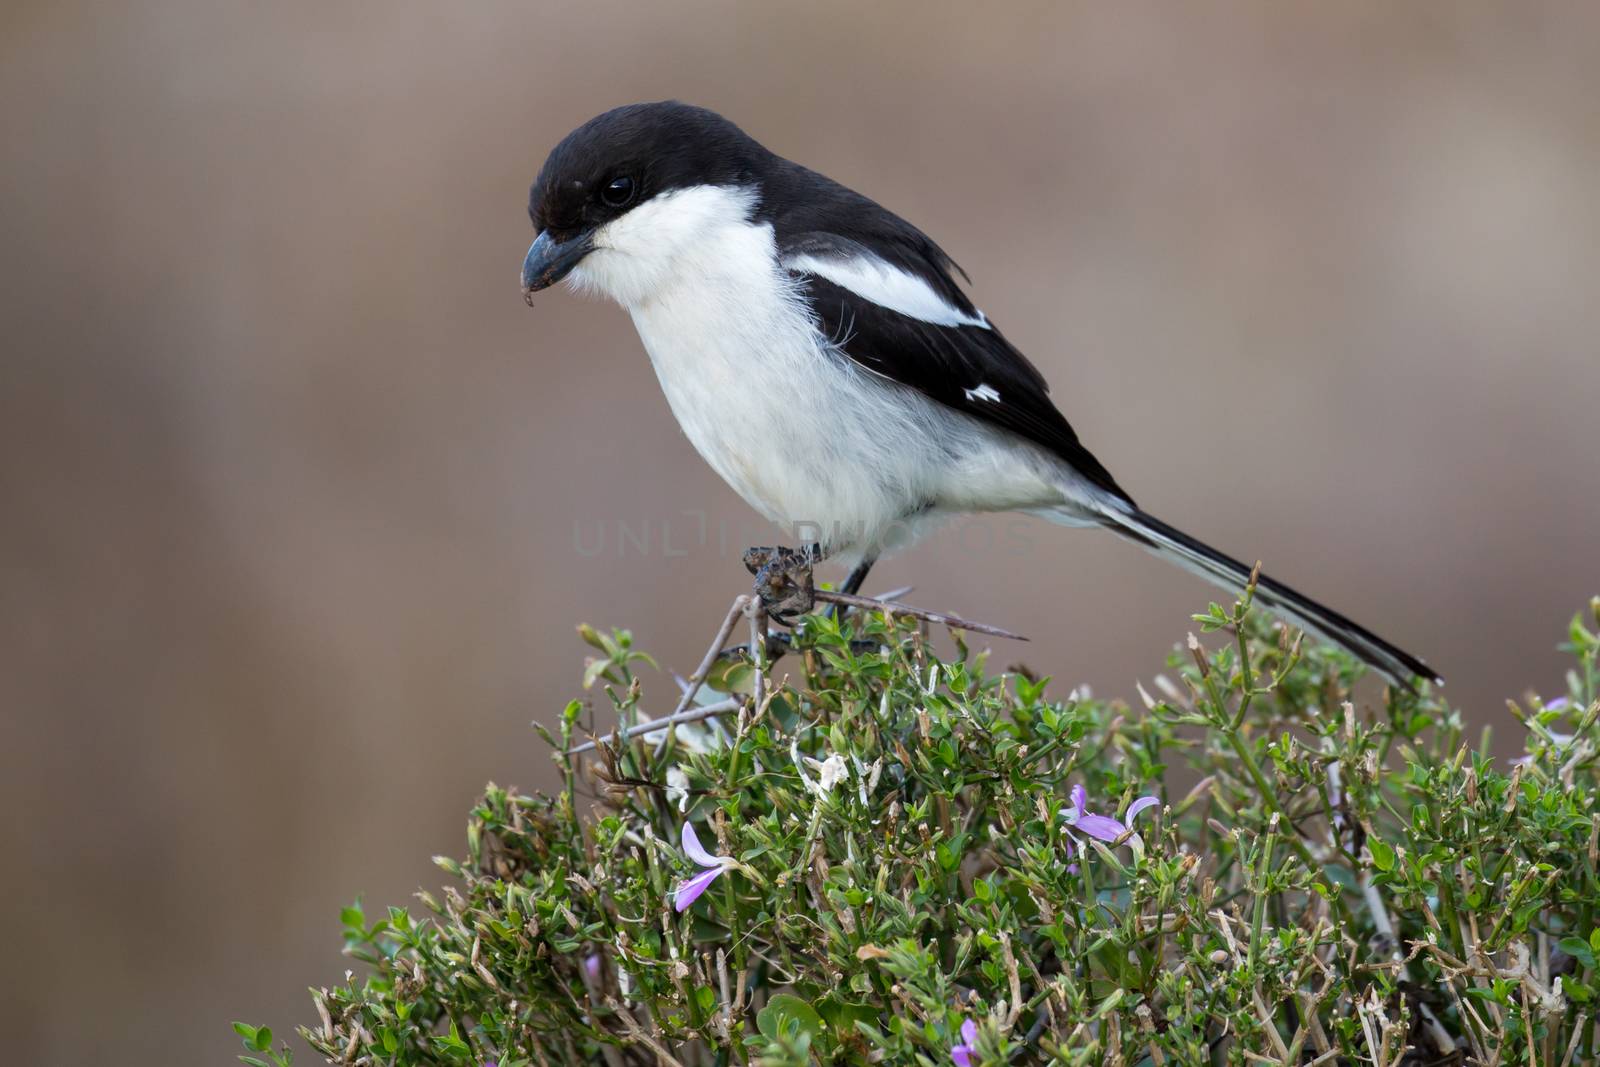 Male Fiscal Shrike Bird with Hooked Beak Perched on Top of a Tree